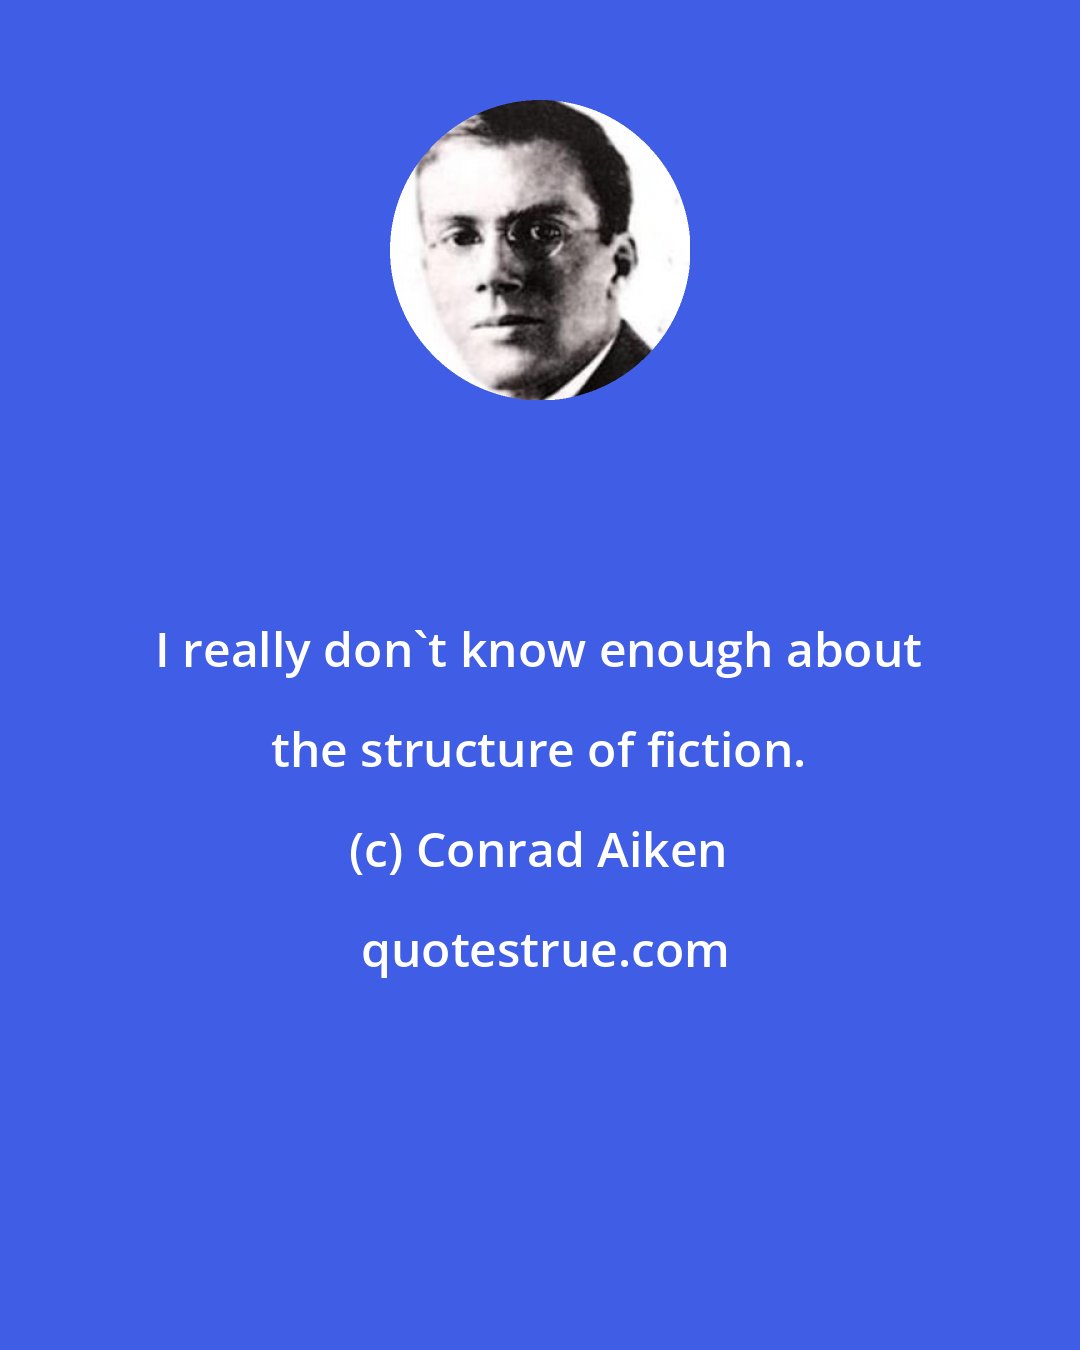 Conrad Aiken: I really don't know enough about the structure of fiction.